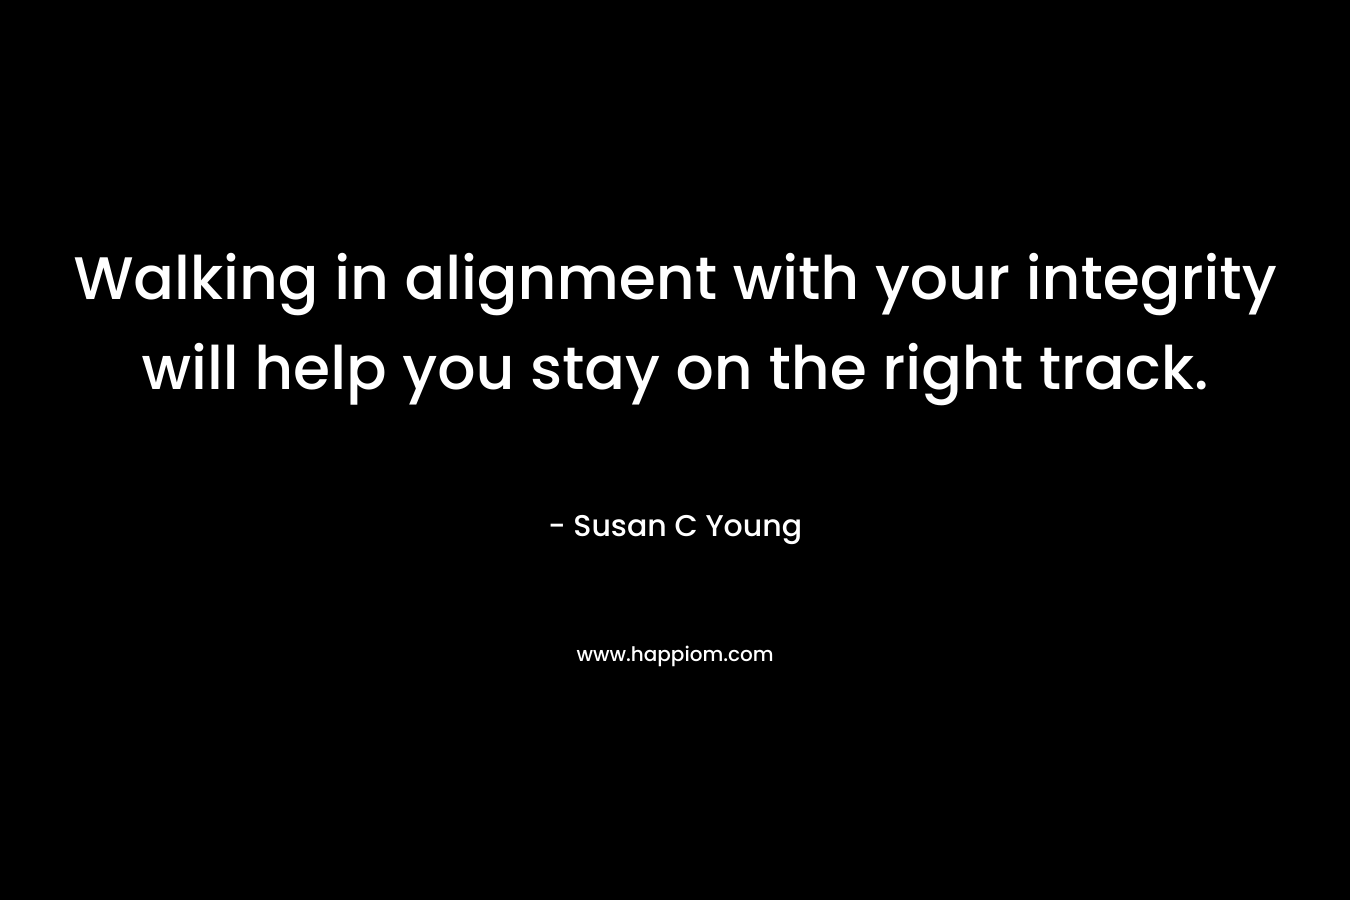 Walking in alignment with your integrity will help you stay on the right track. – Susan C Young